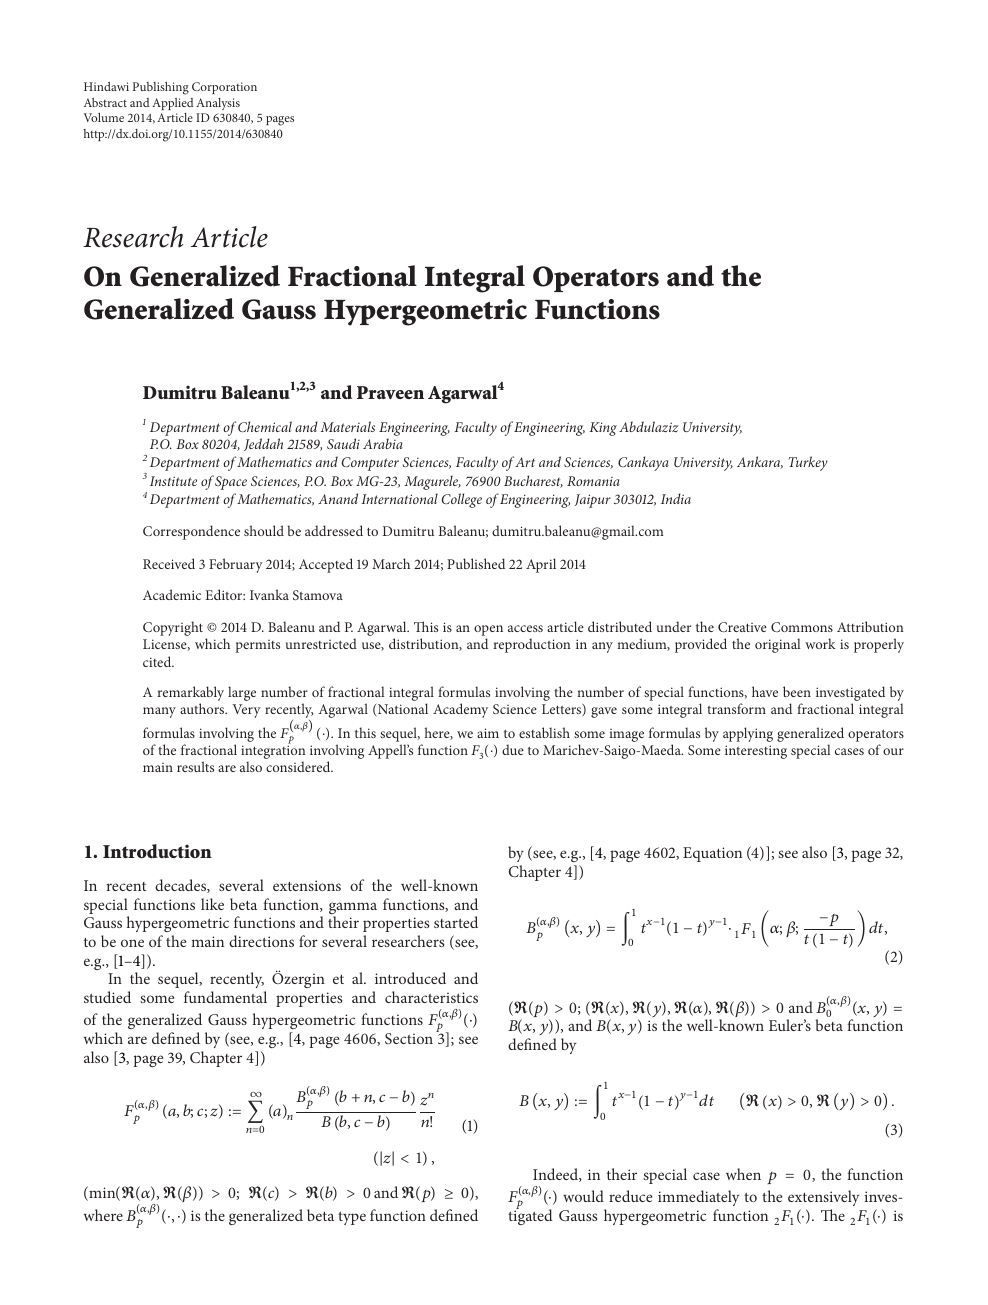 On Generalized Fractional Integral Operators And The Generalized Gauss Hypergeometric Functions Topic Of Research Paper In Mathematics Download Scholarly Article Pdf And Read For Free On Cyberleninka Open Science Hub